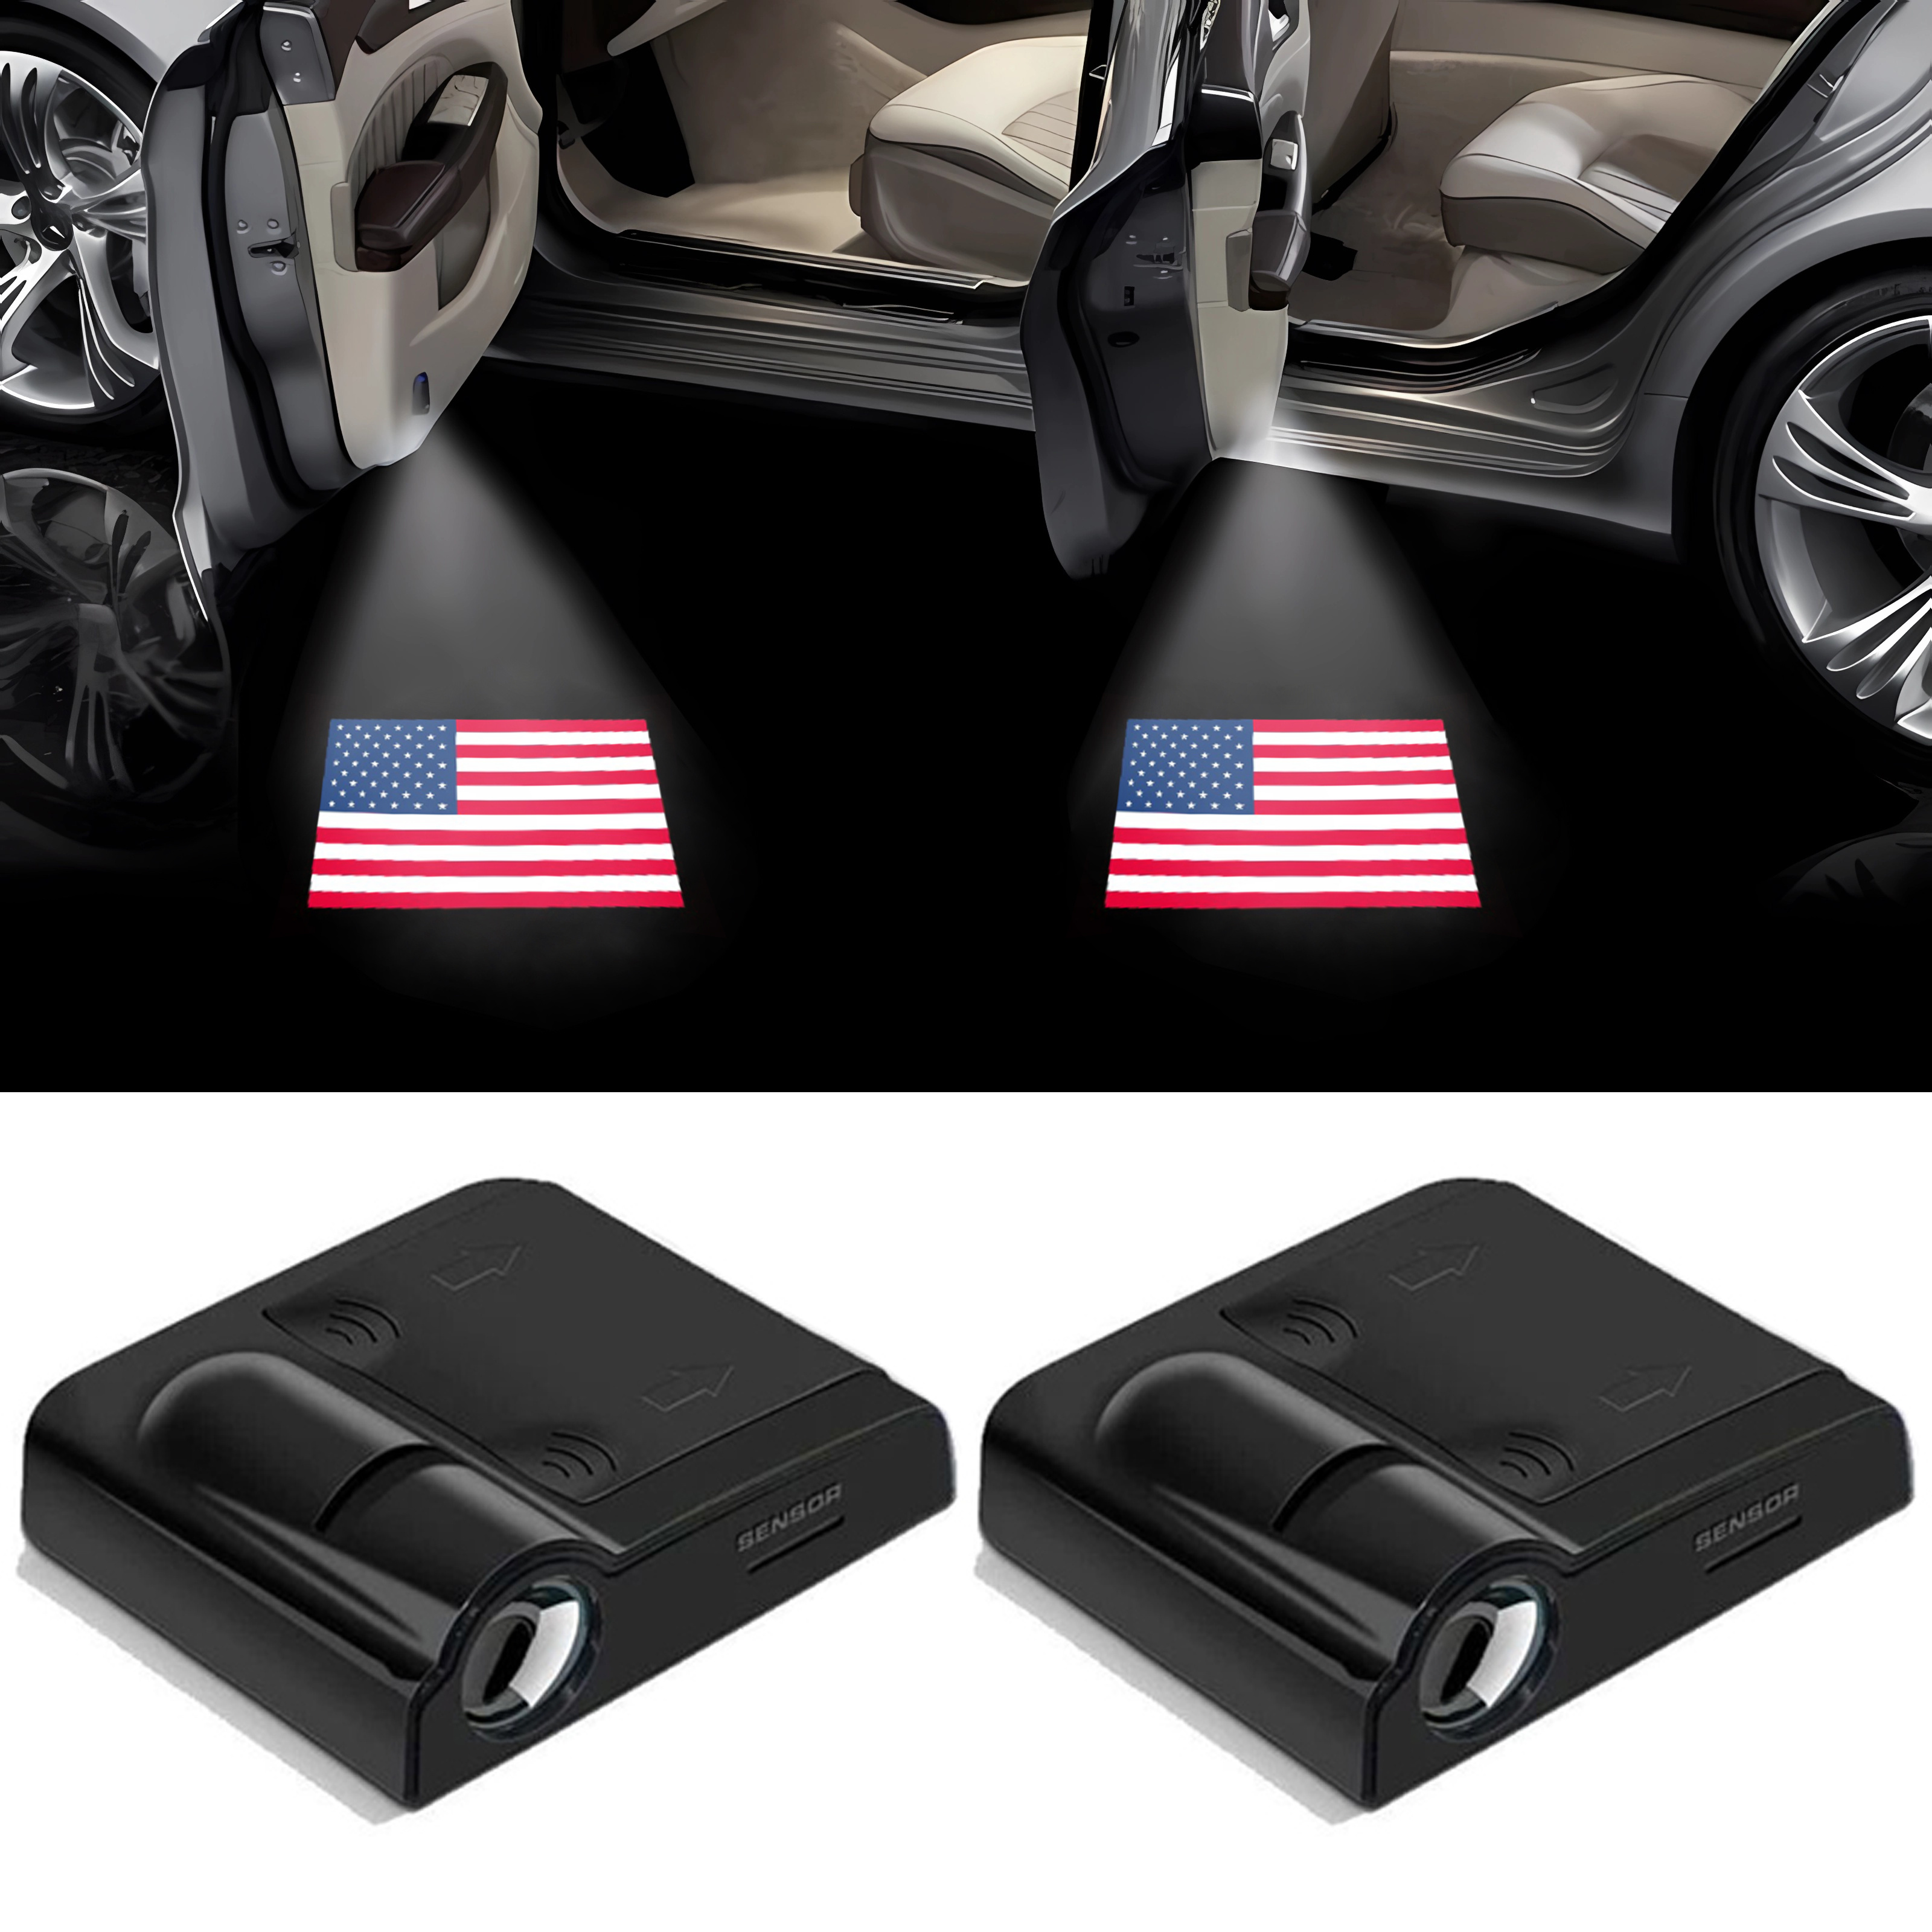 Light Up Your Car This Independence Day with an American Flag Projector!